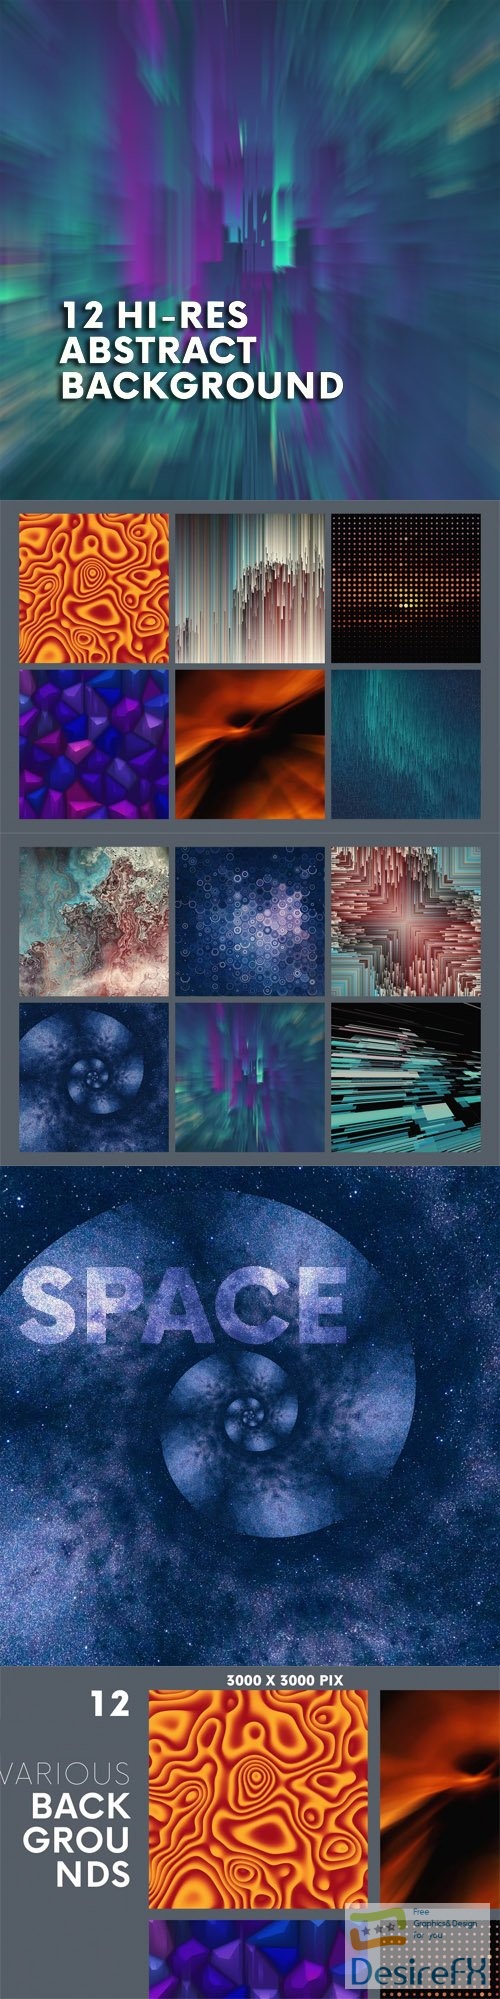 12 Hi-Res Abstract Overlays for Photoshop Vol.2